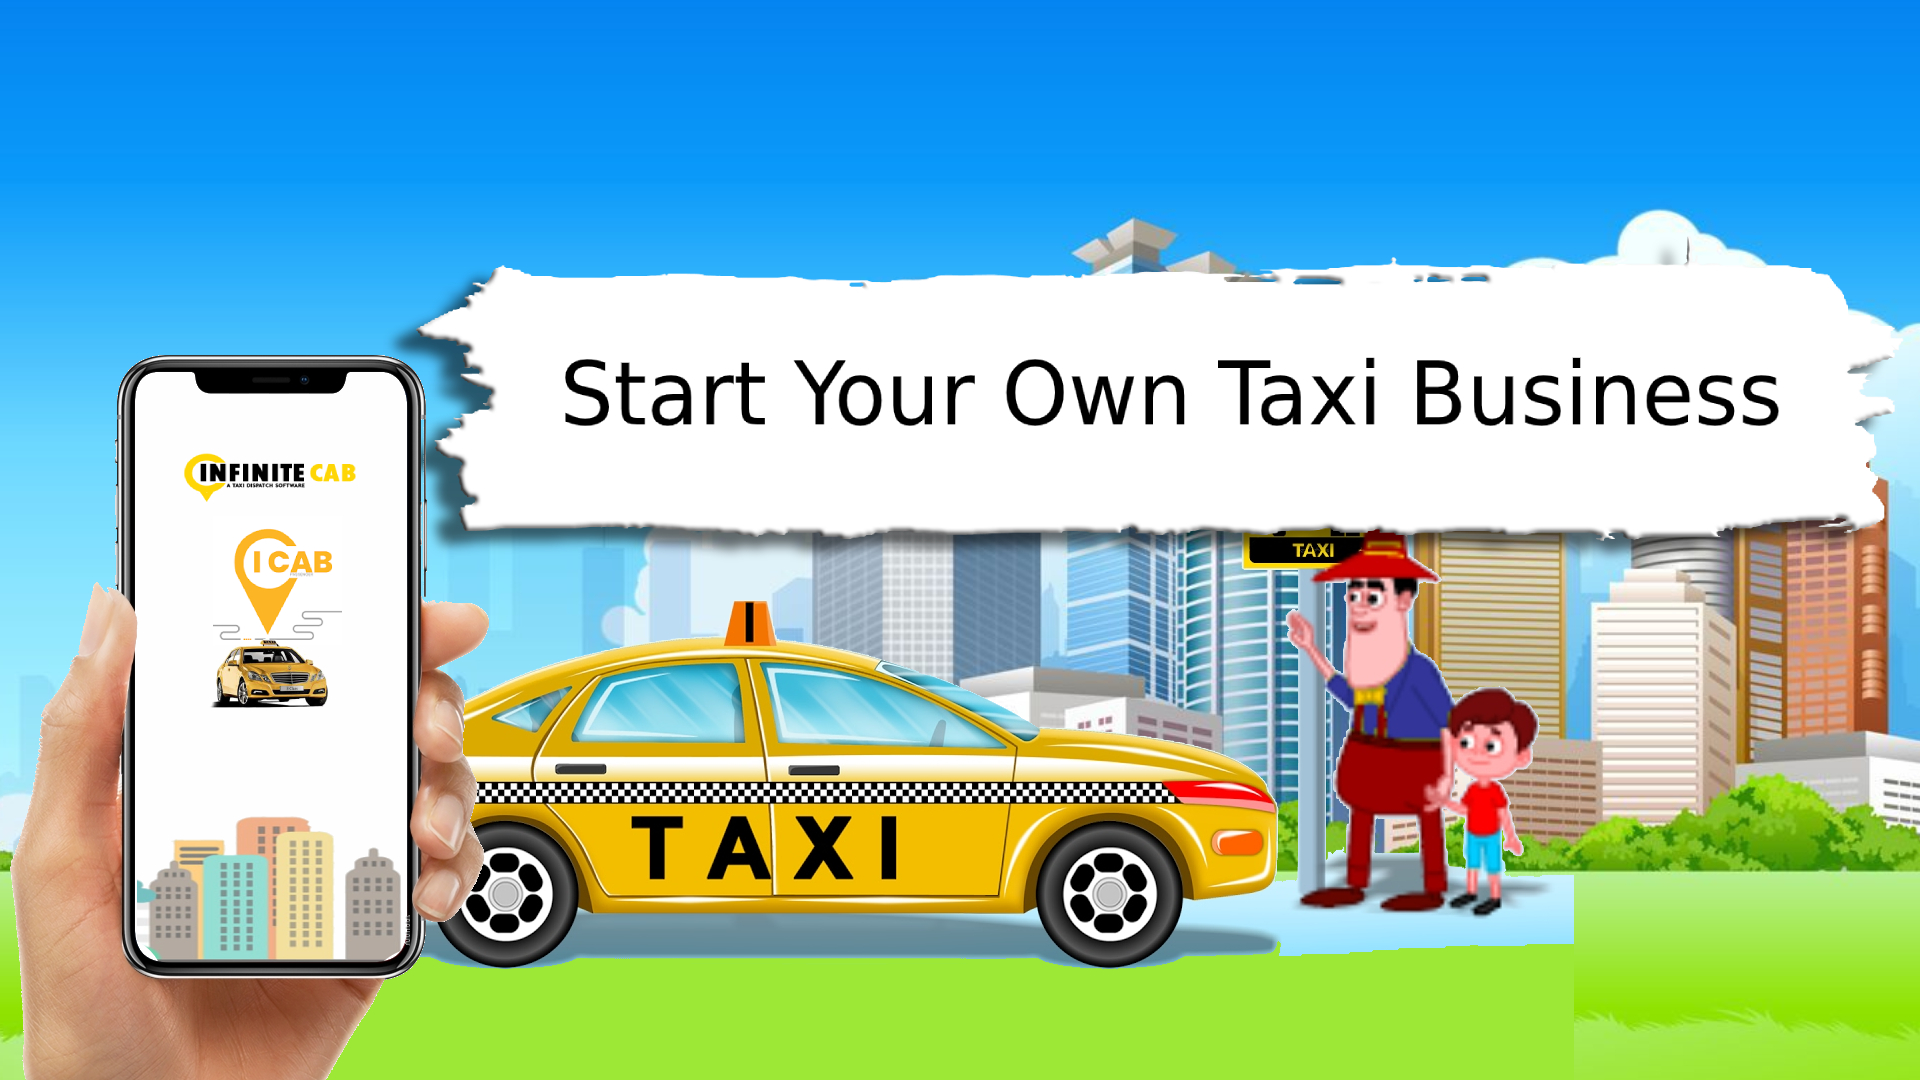 taxi company business plan